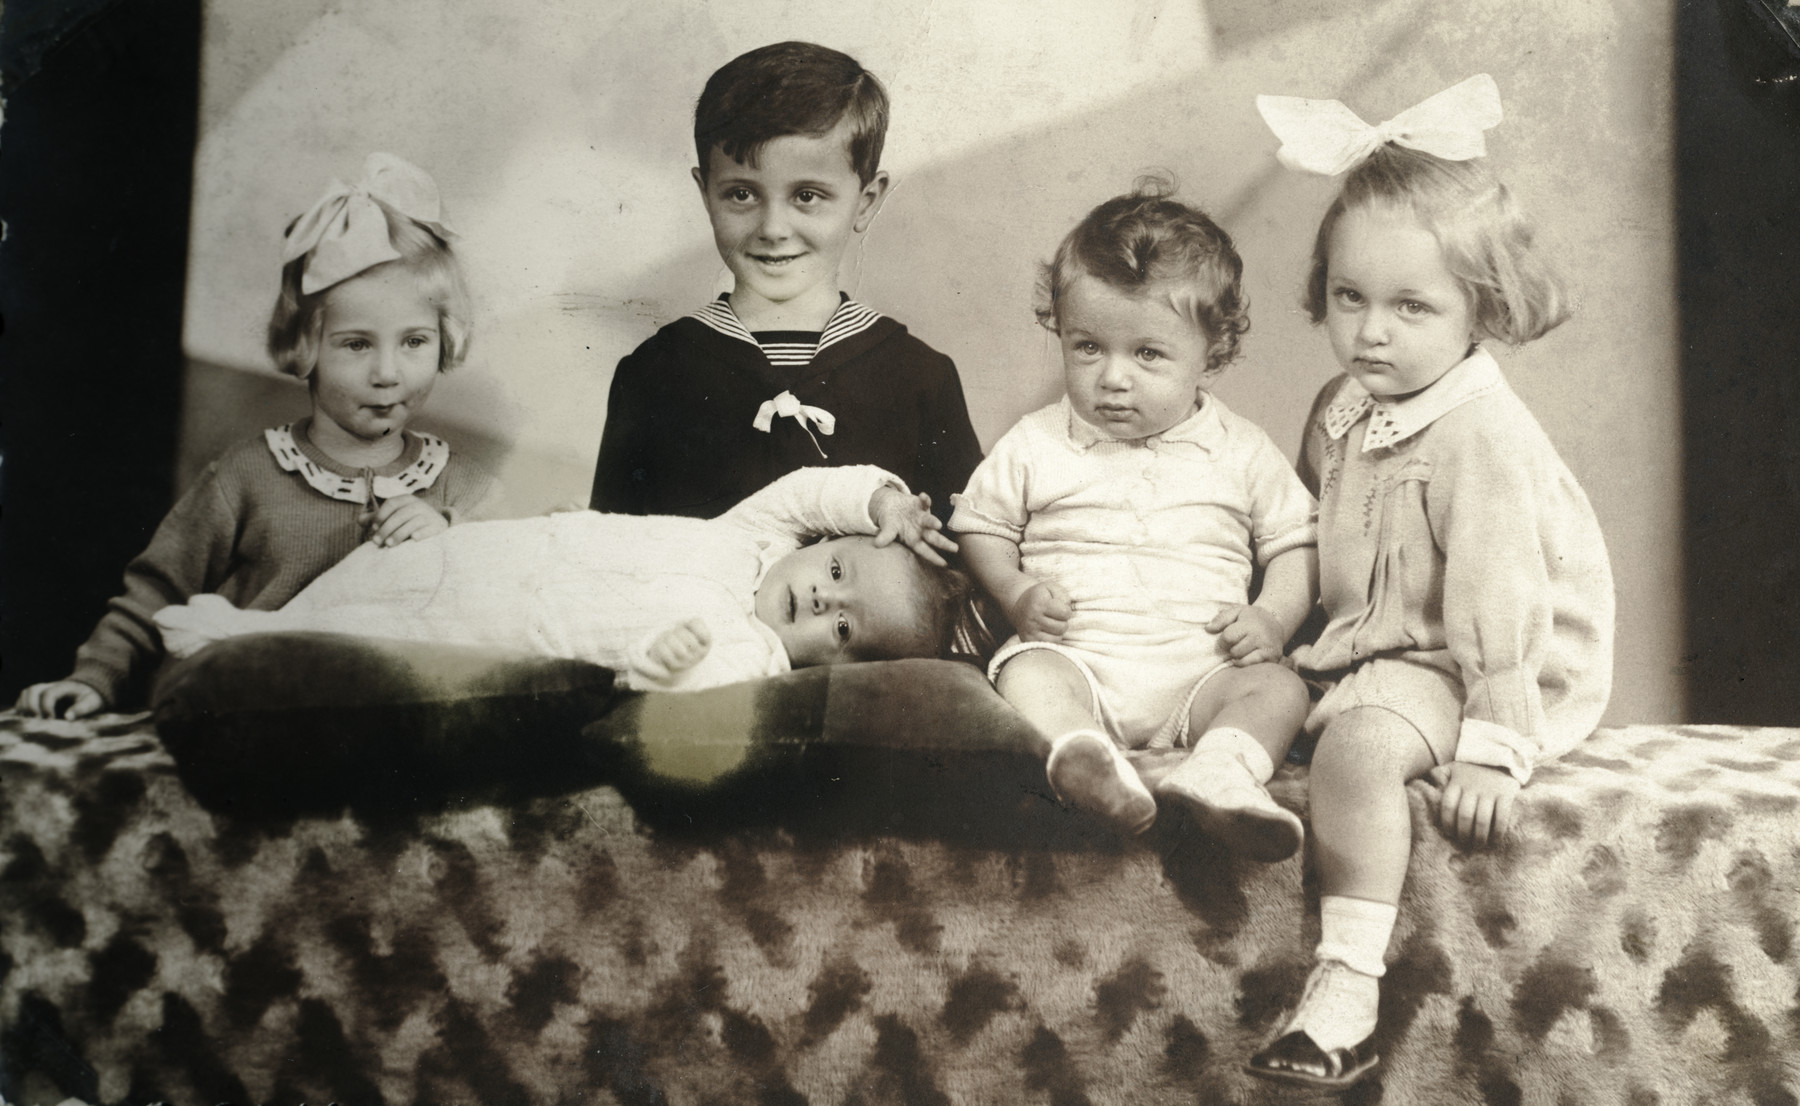 Studio portrait of five Hungarian Jewish cousins.

Judith Schonfeld is pictured on the far left.  In the center are Toni Itzkovits and his brothers (all perished).  Marika is on the far right.